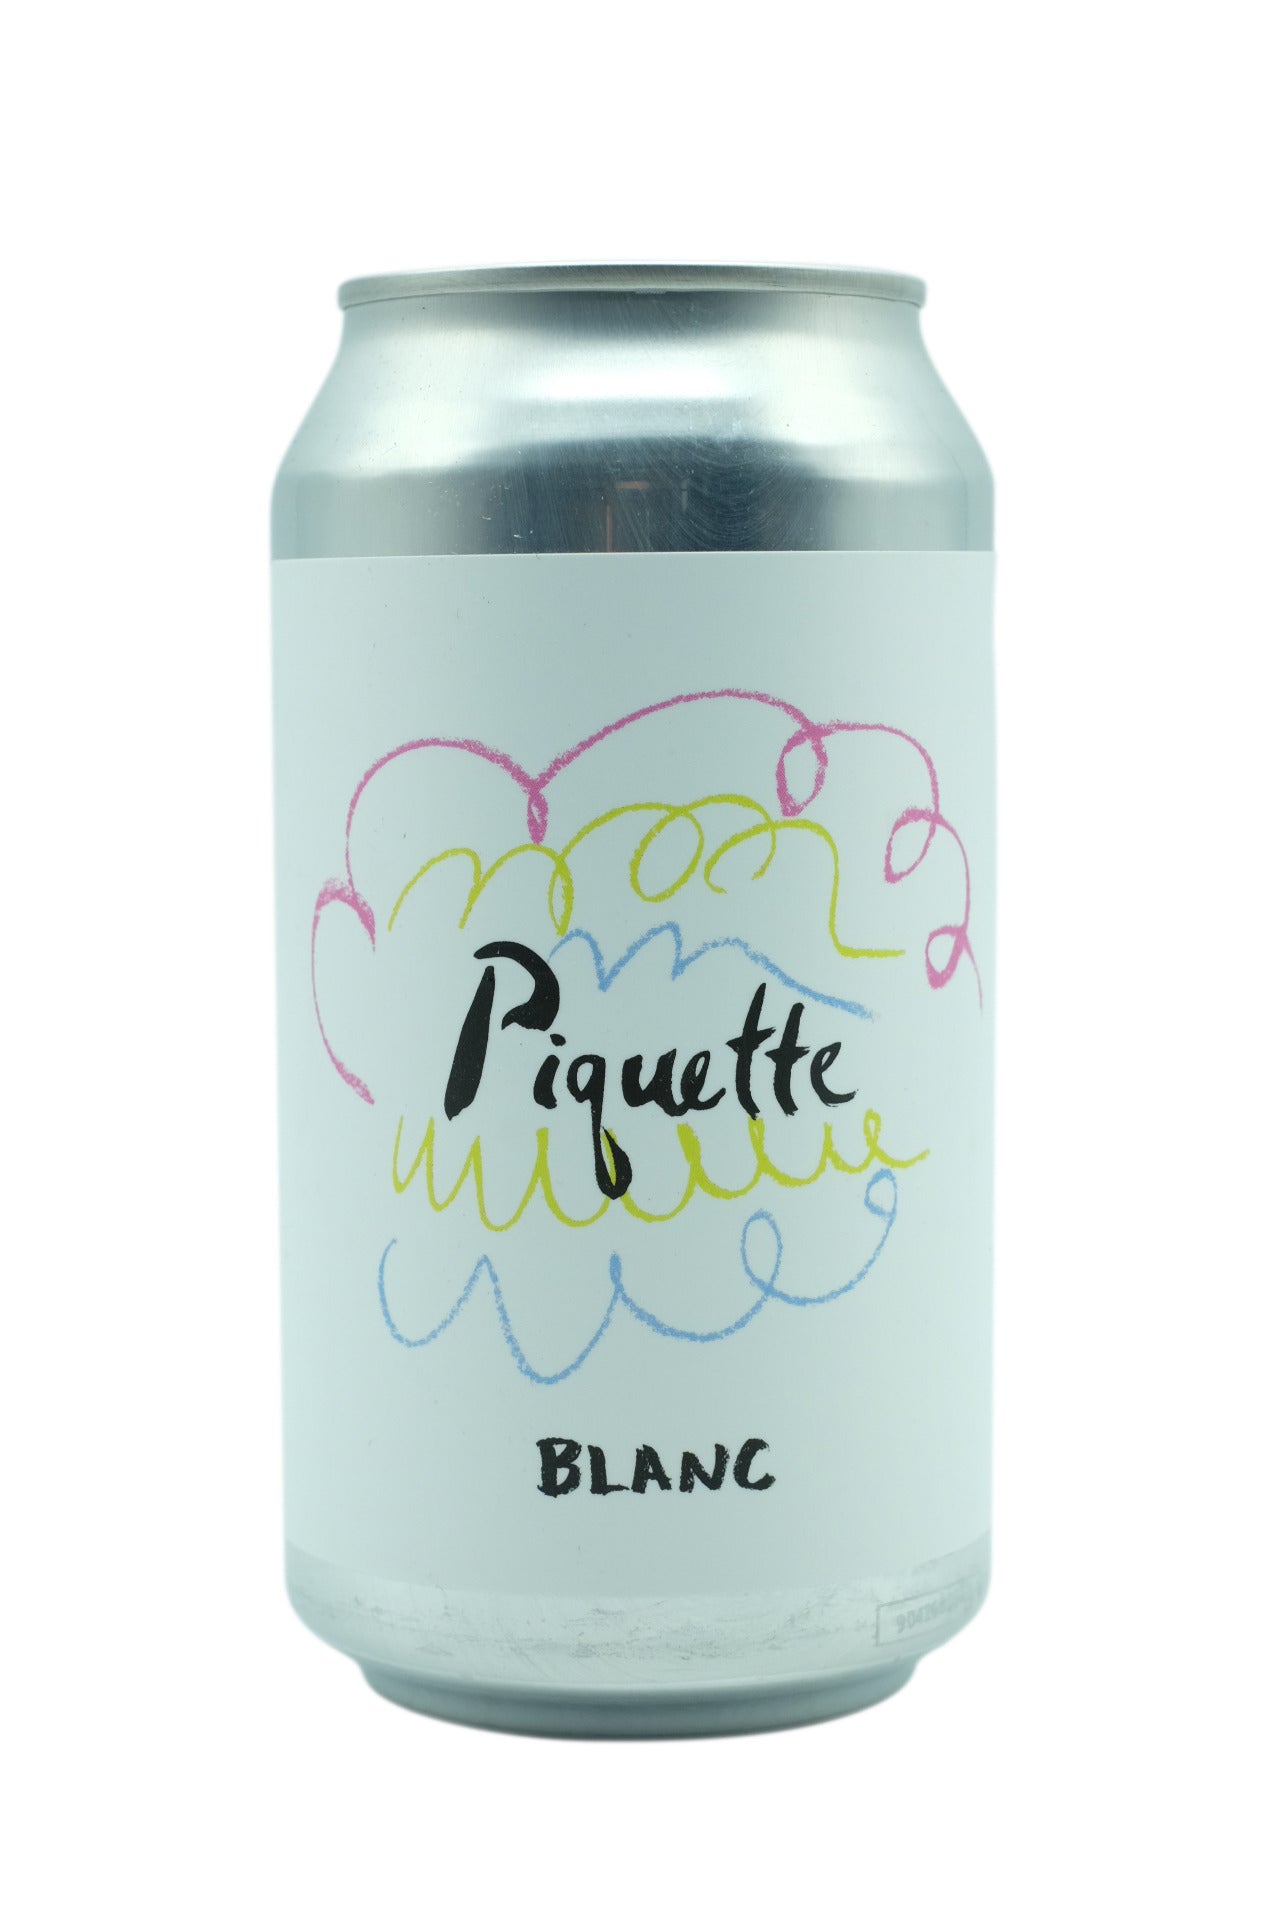 A Sunday in August Piquette Blanc Cans